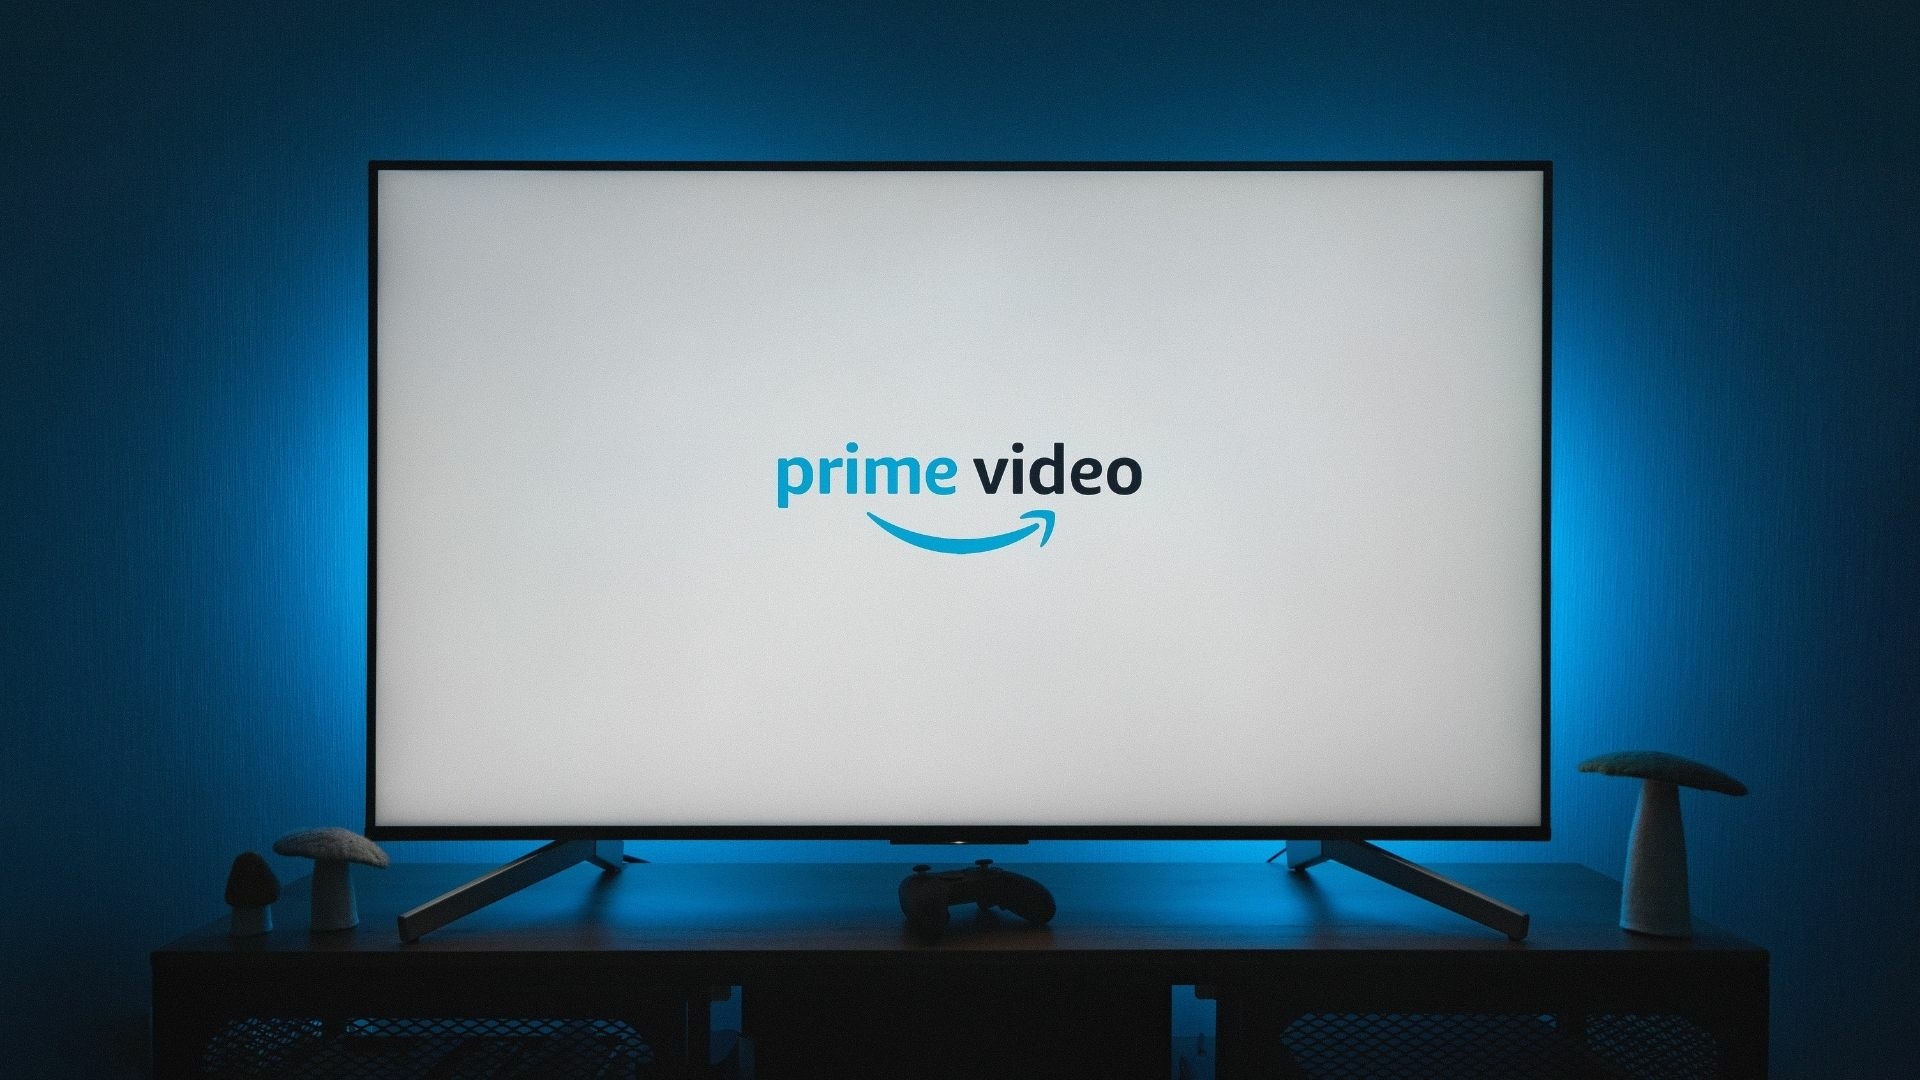 How to fix Amazon Prime Video not streaming in 4K